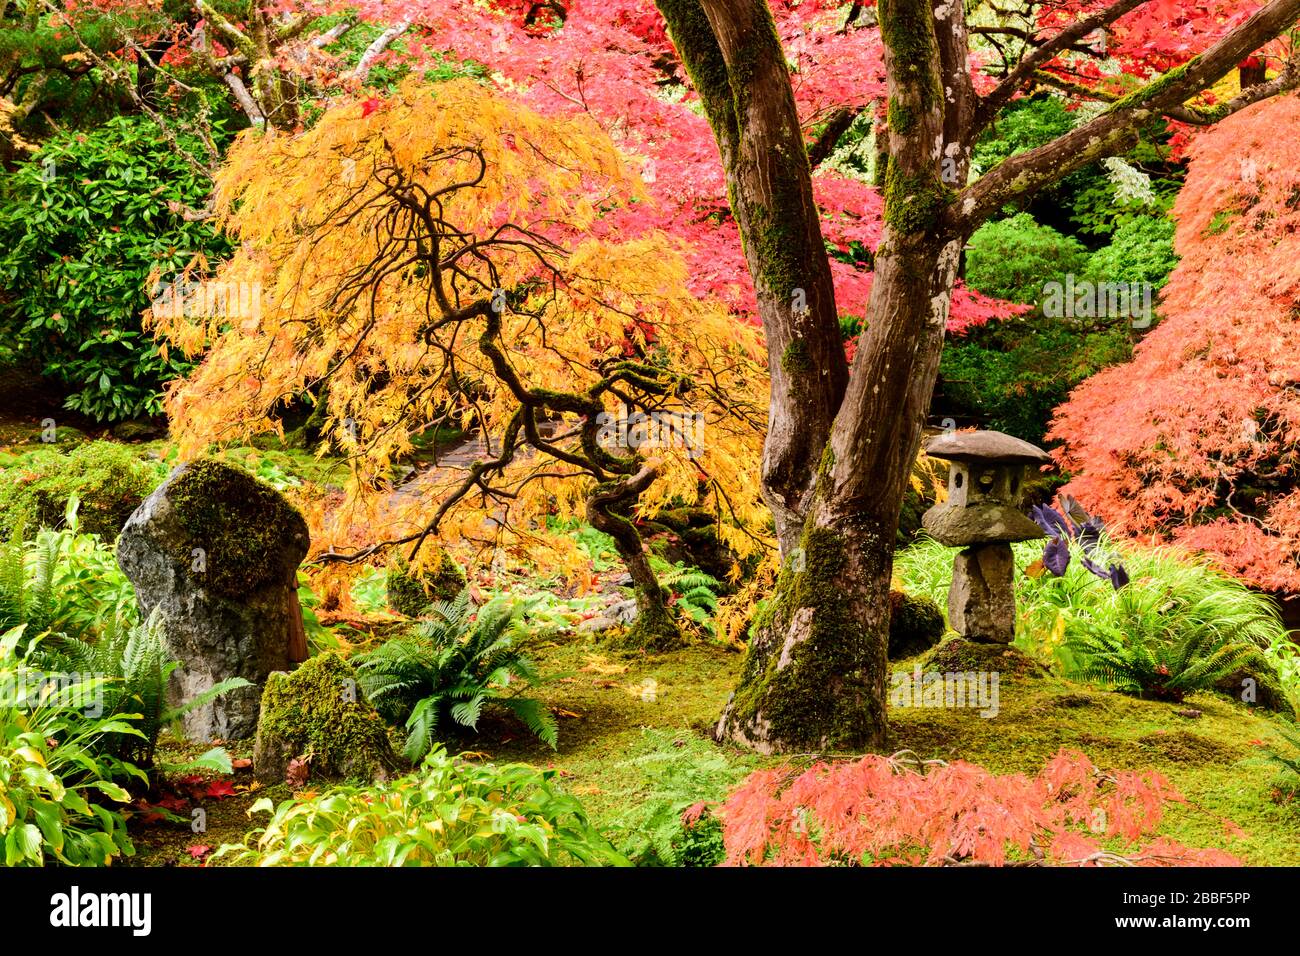 An orange Japanese maple tree (Acer palmatum) and a Japanese lantern in the Japanese Garden at Butchart Gardens in Victoria, British Columbia. Stock Photo